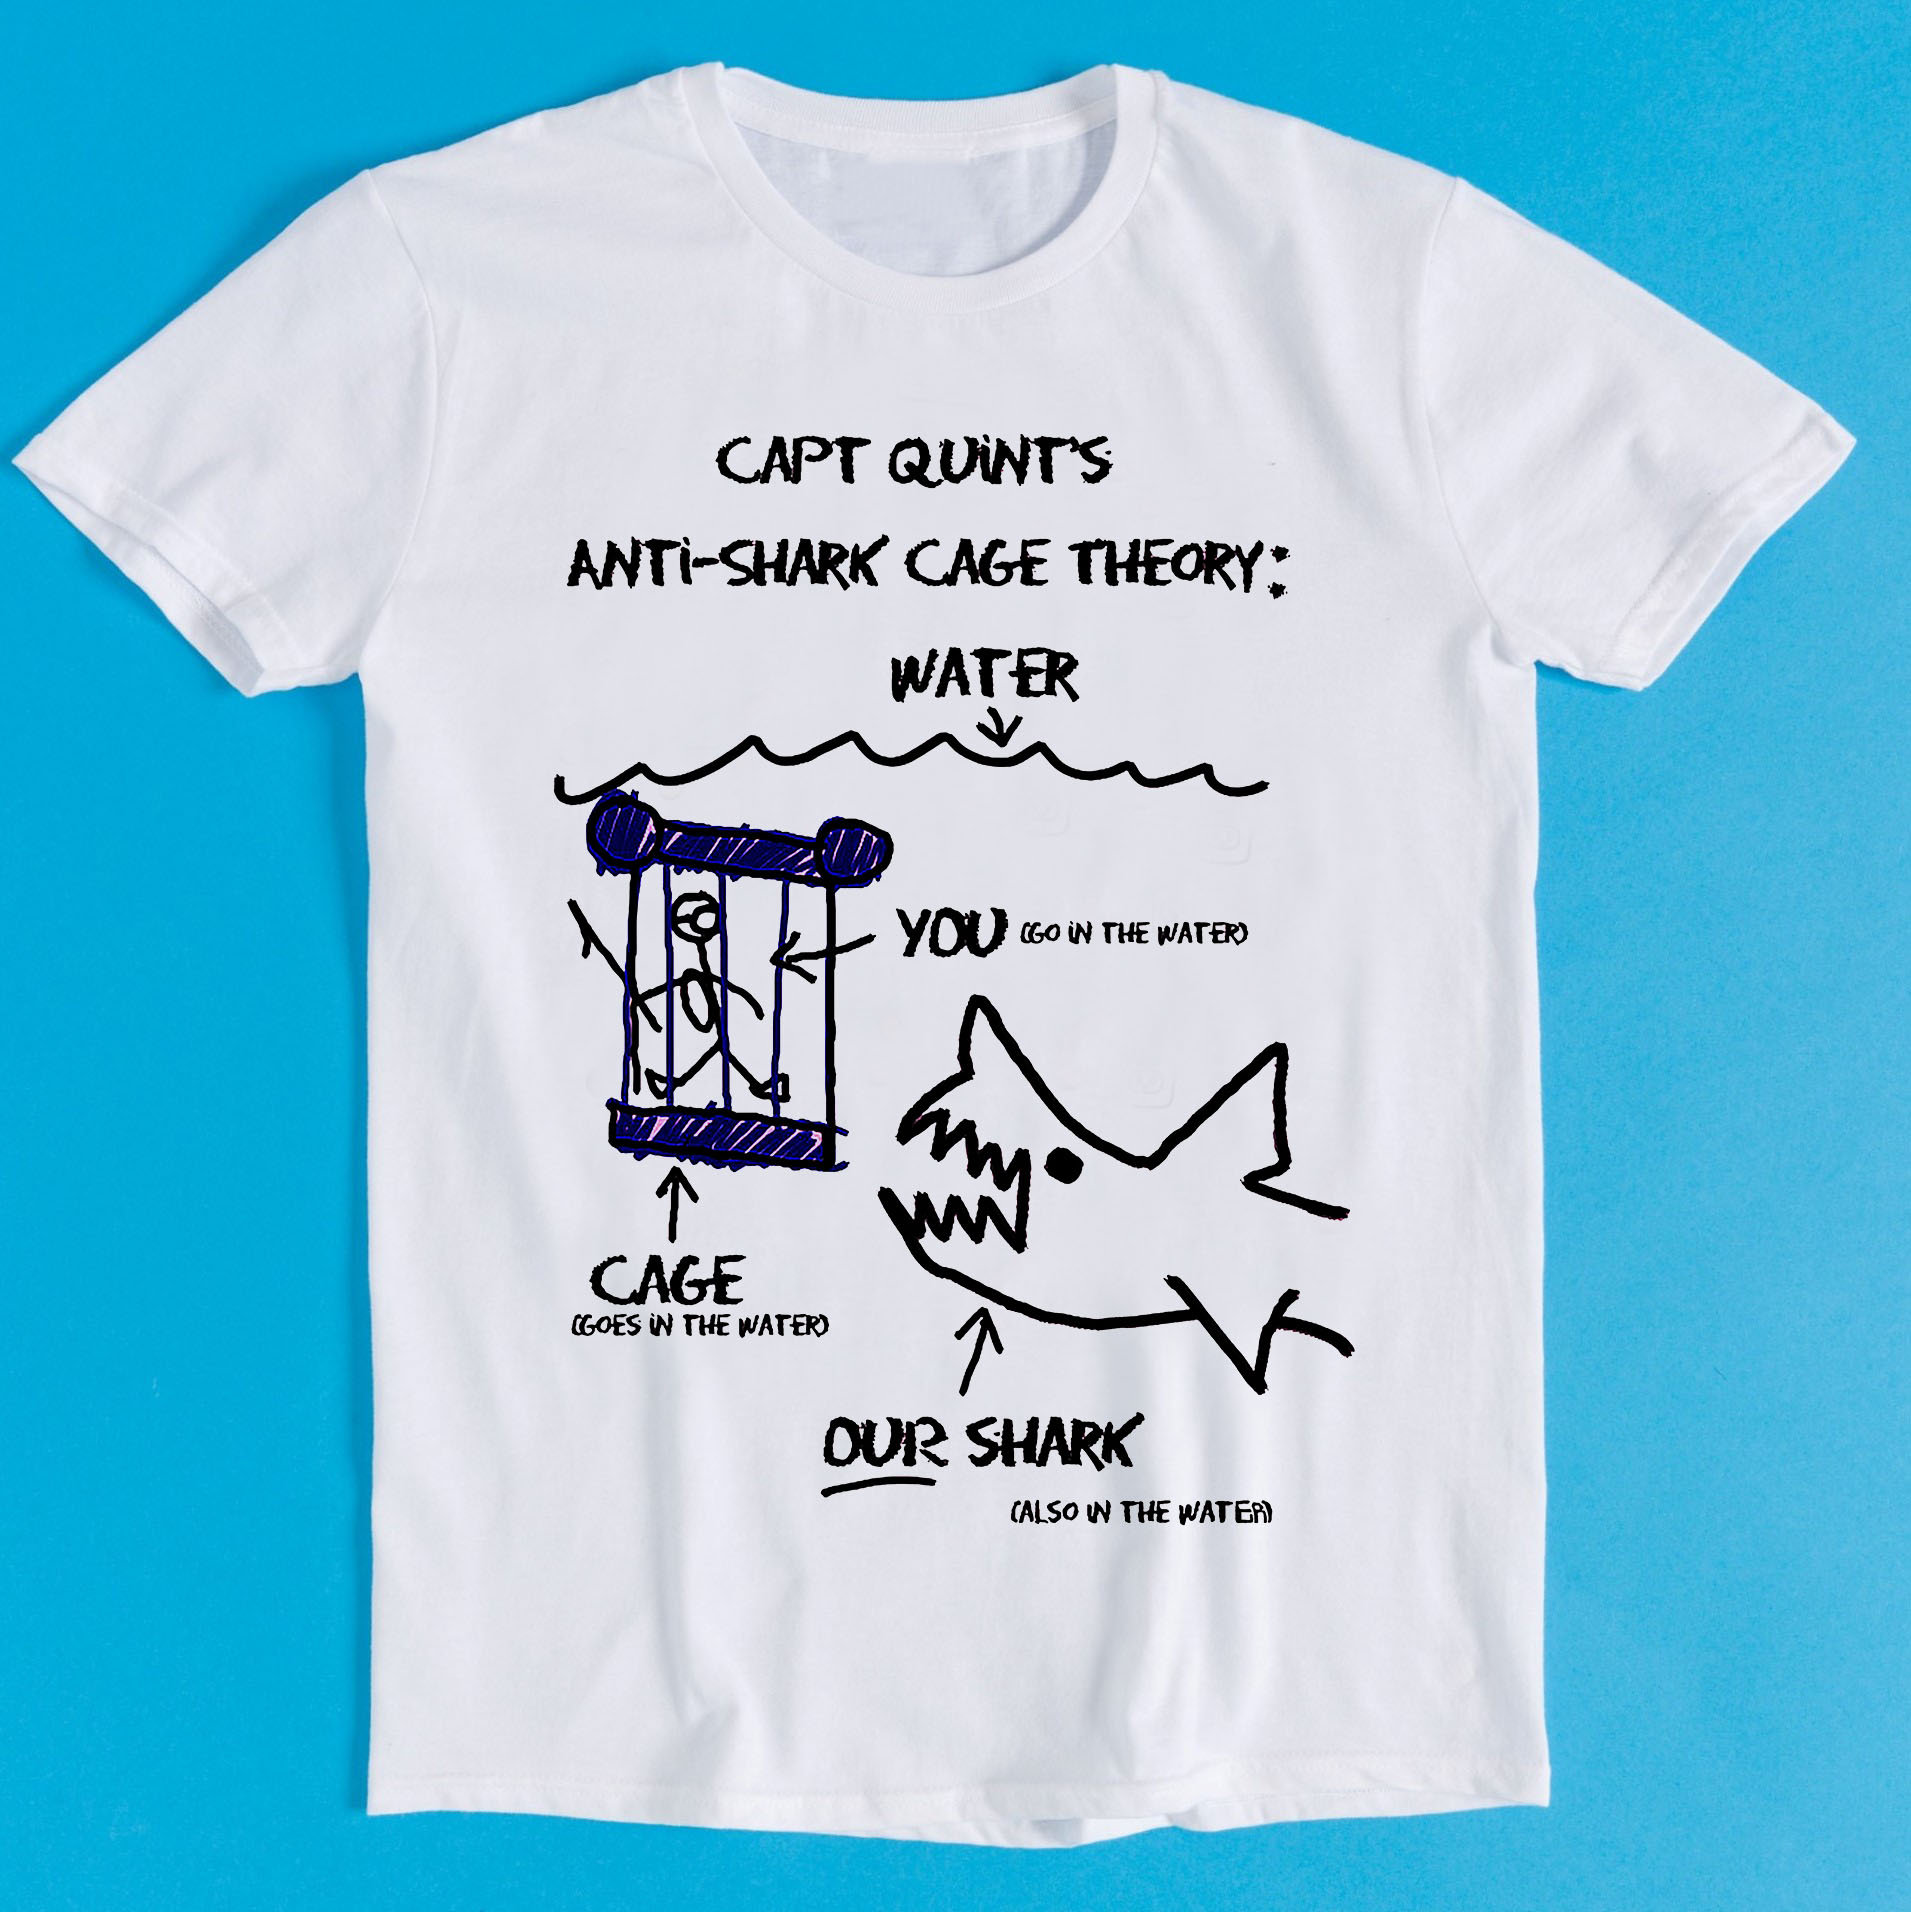 Jaws Paws Capt Quints Anti Shark Cage Theory Water Funny Art Drawing Gamer Cult Meme Movie Music Gift Tee T Shirt K1096